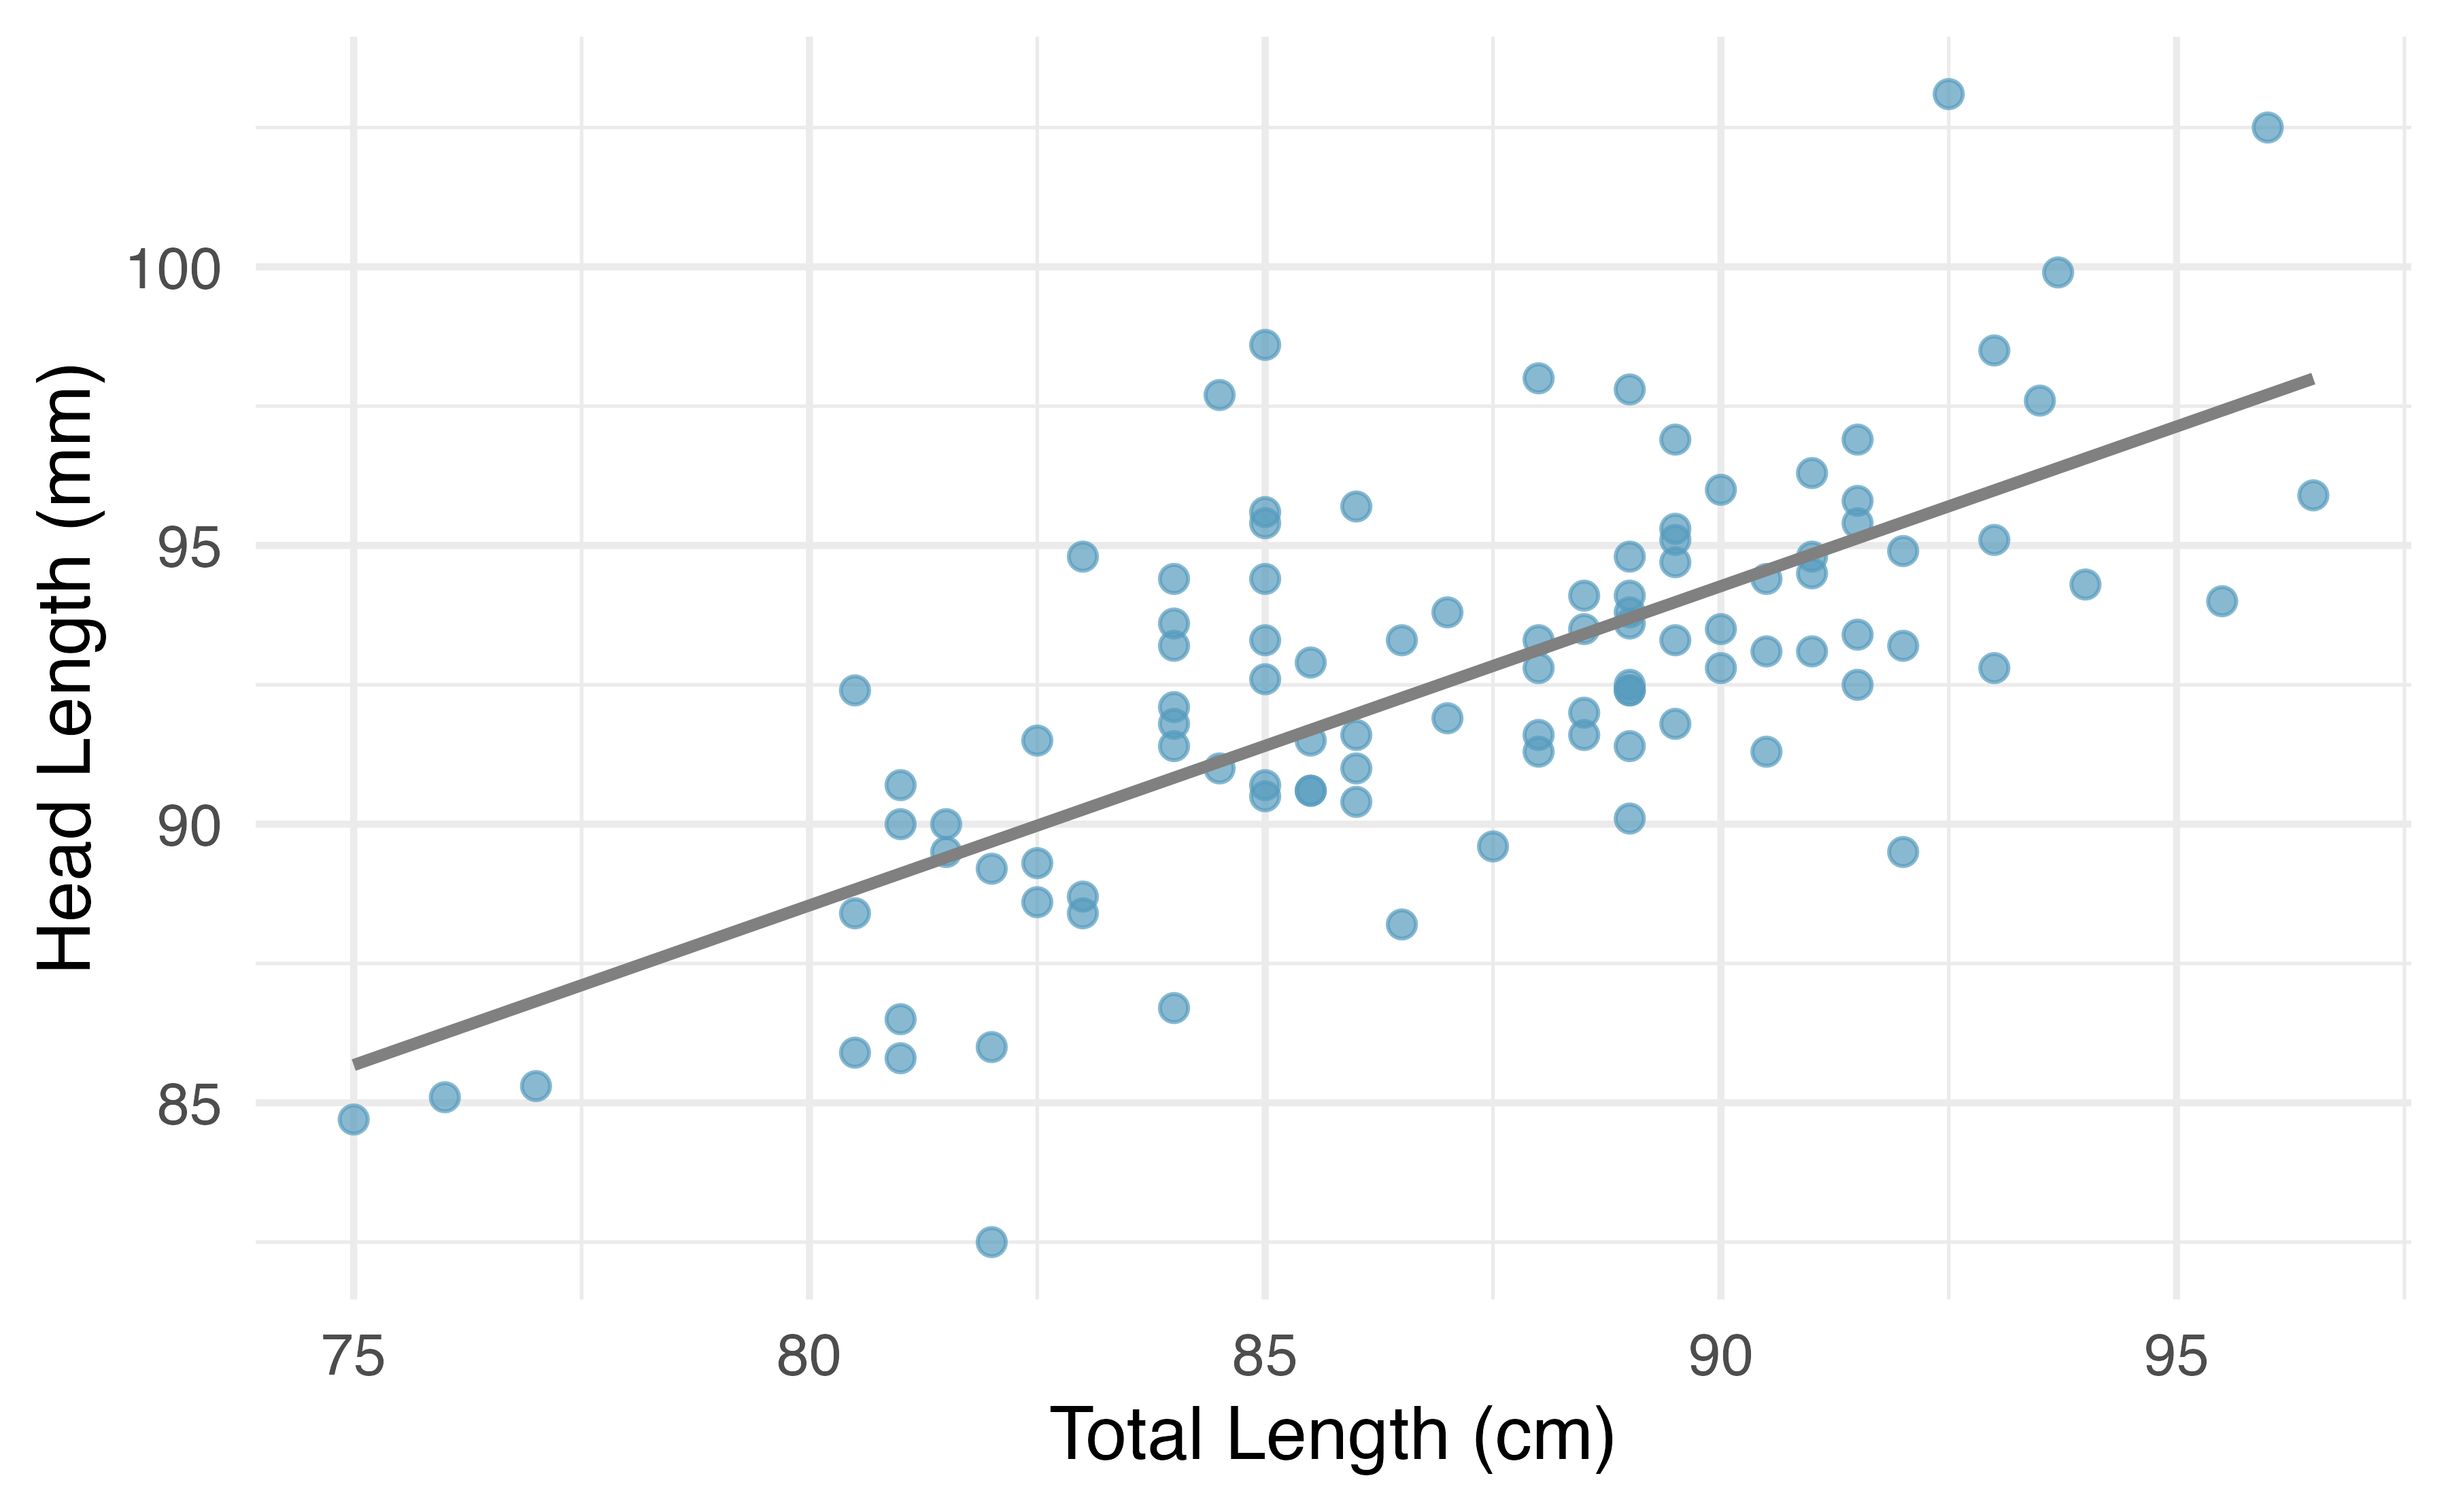 A scatterplot with total length on the x-axis and head length on the y-axis.  The variables show a moderately strong positive linear relationship. A least squares line is superimposed.